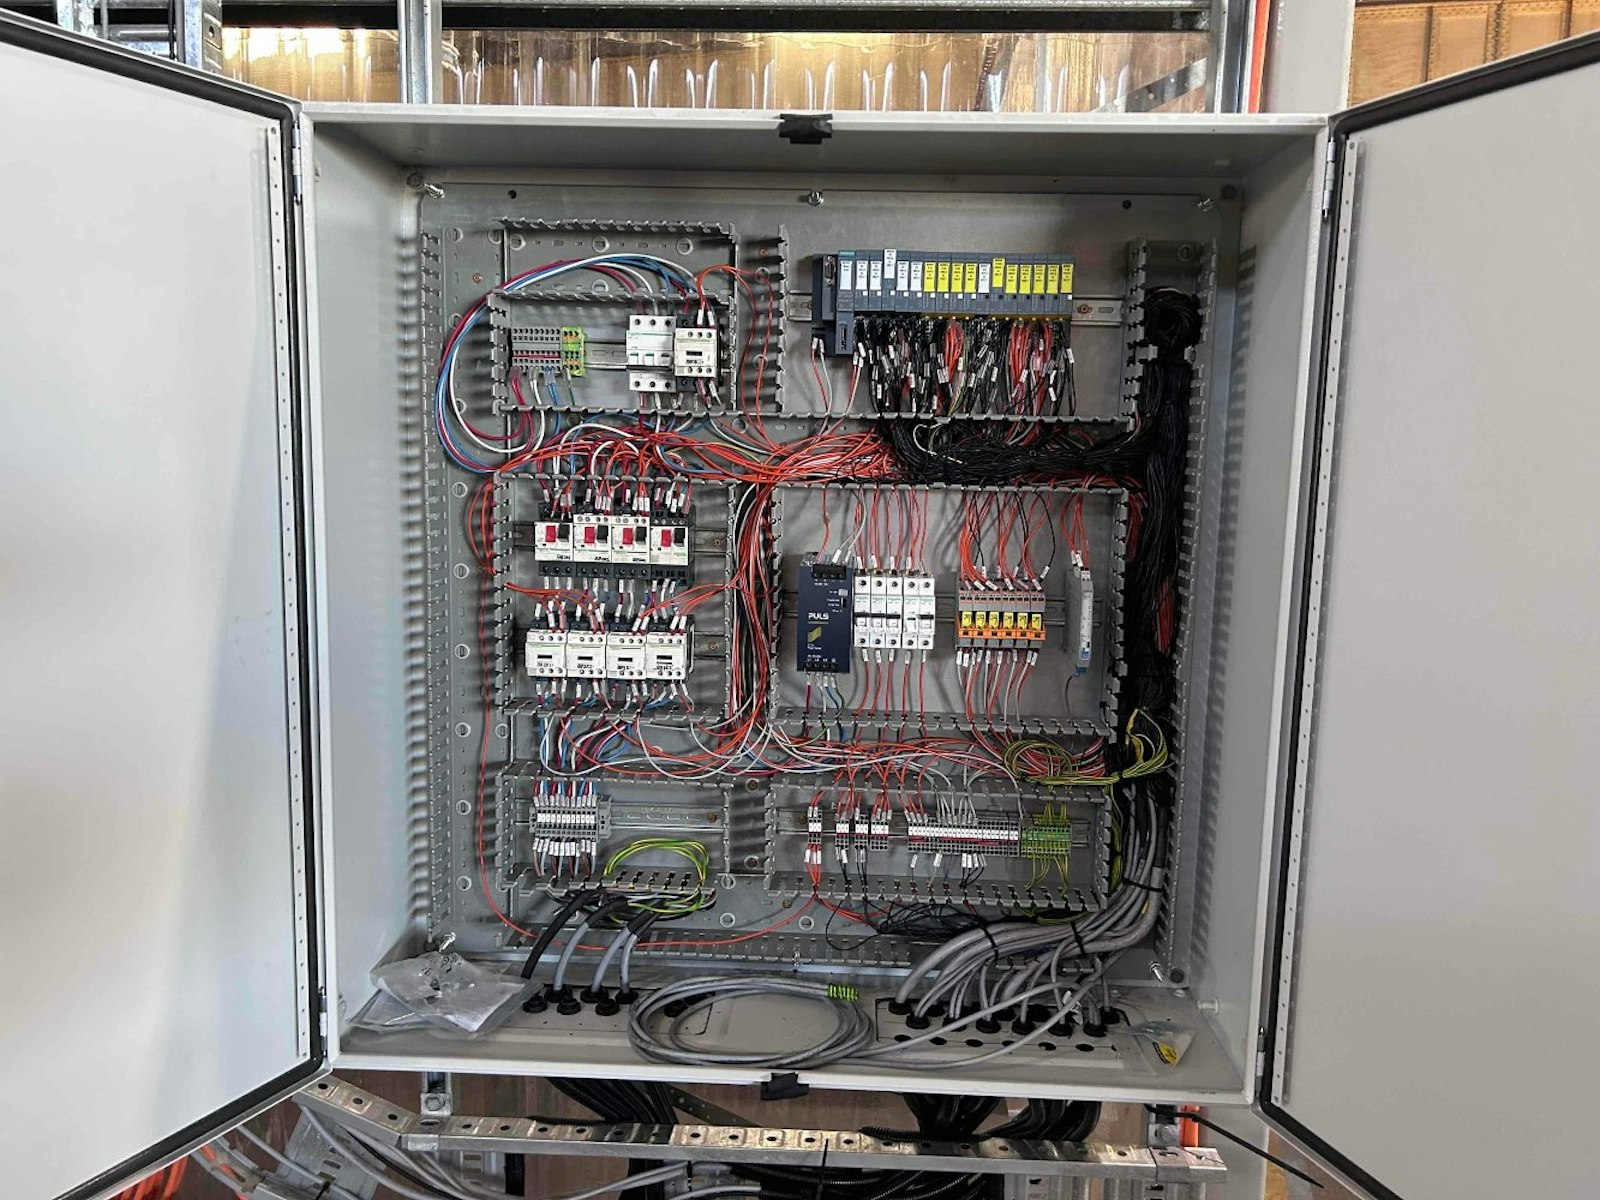 Services electric infrabuild-panel-wiring